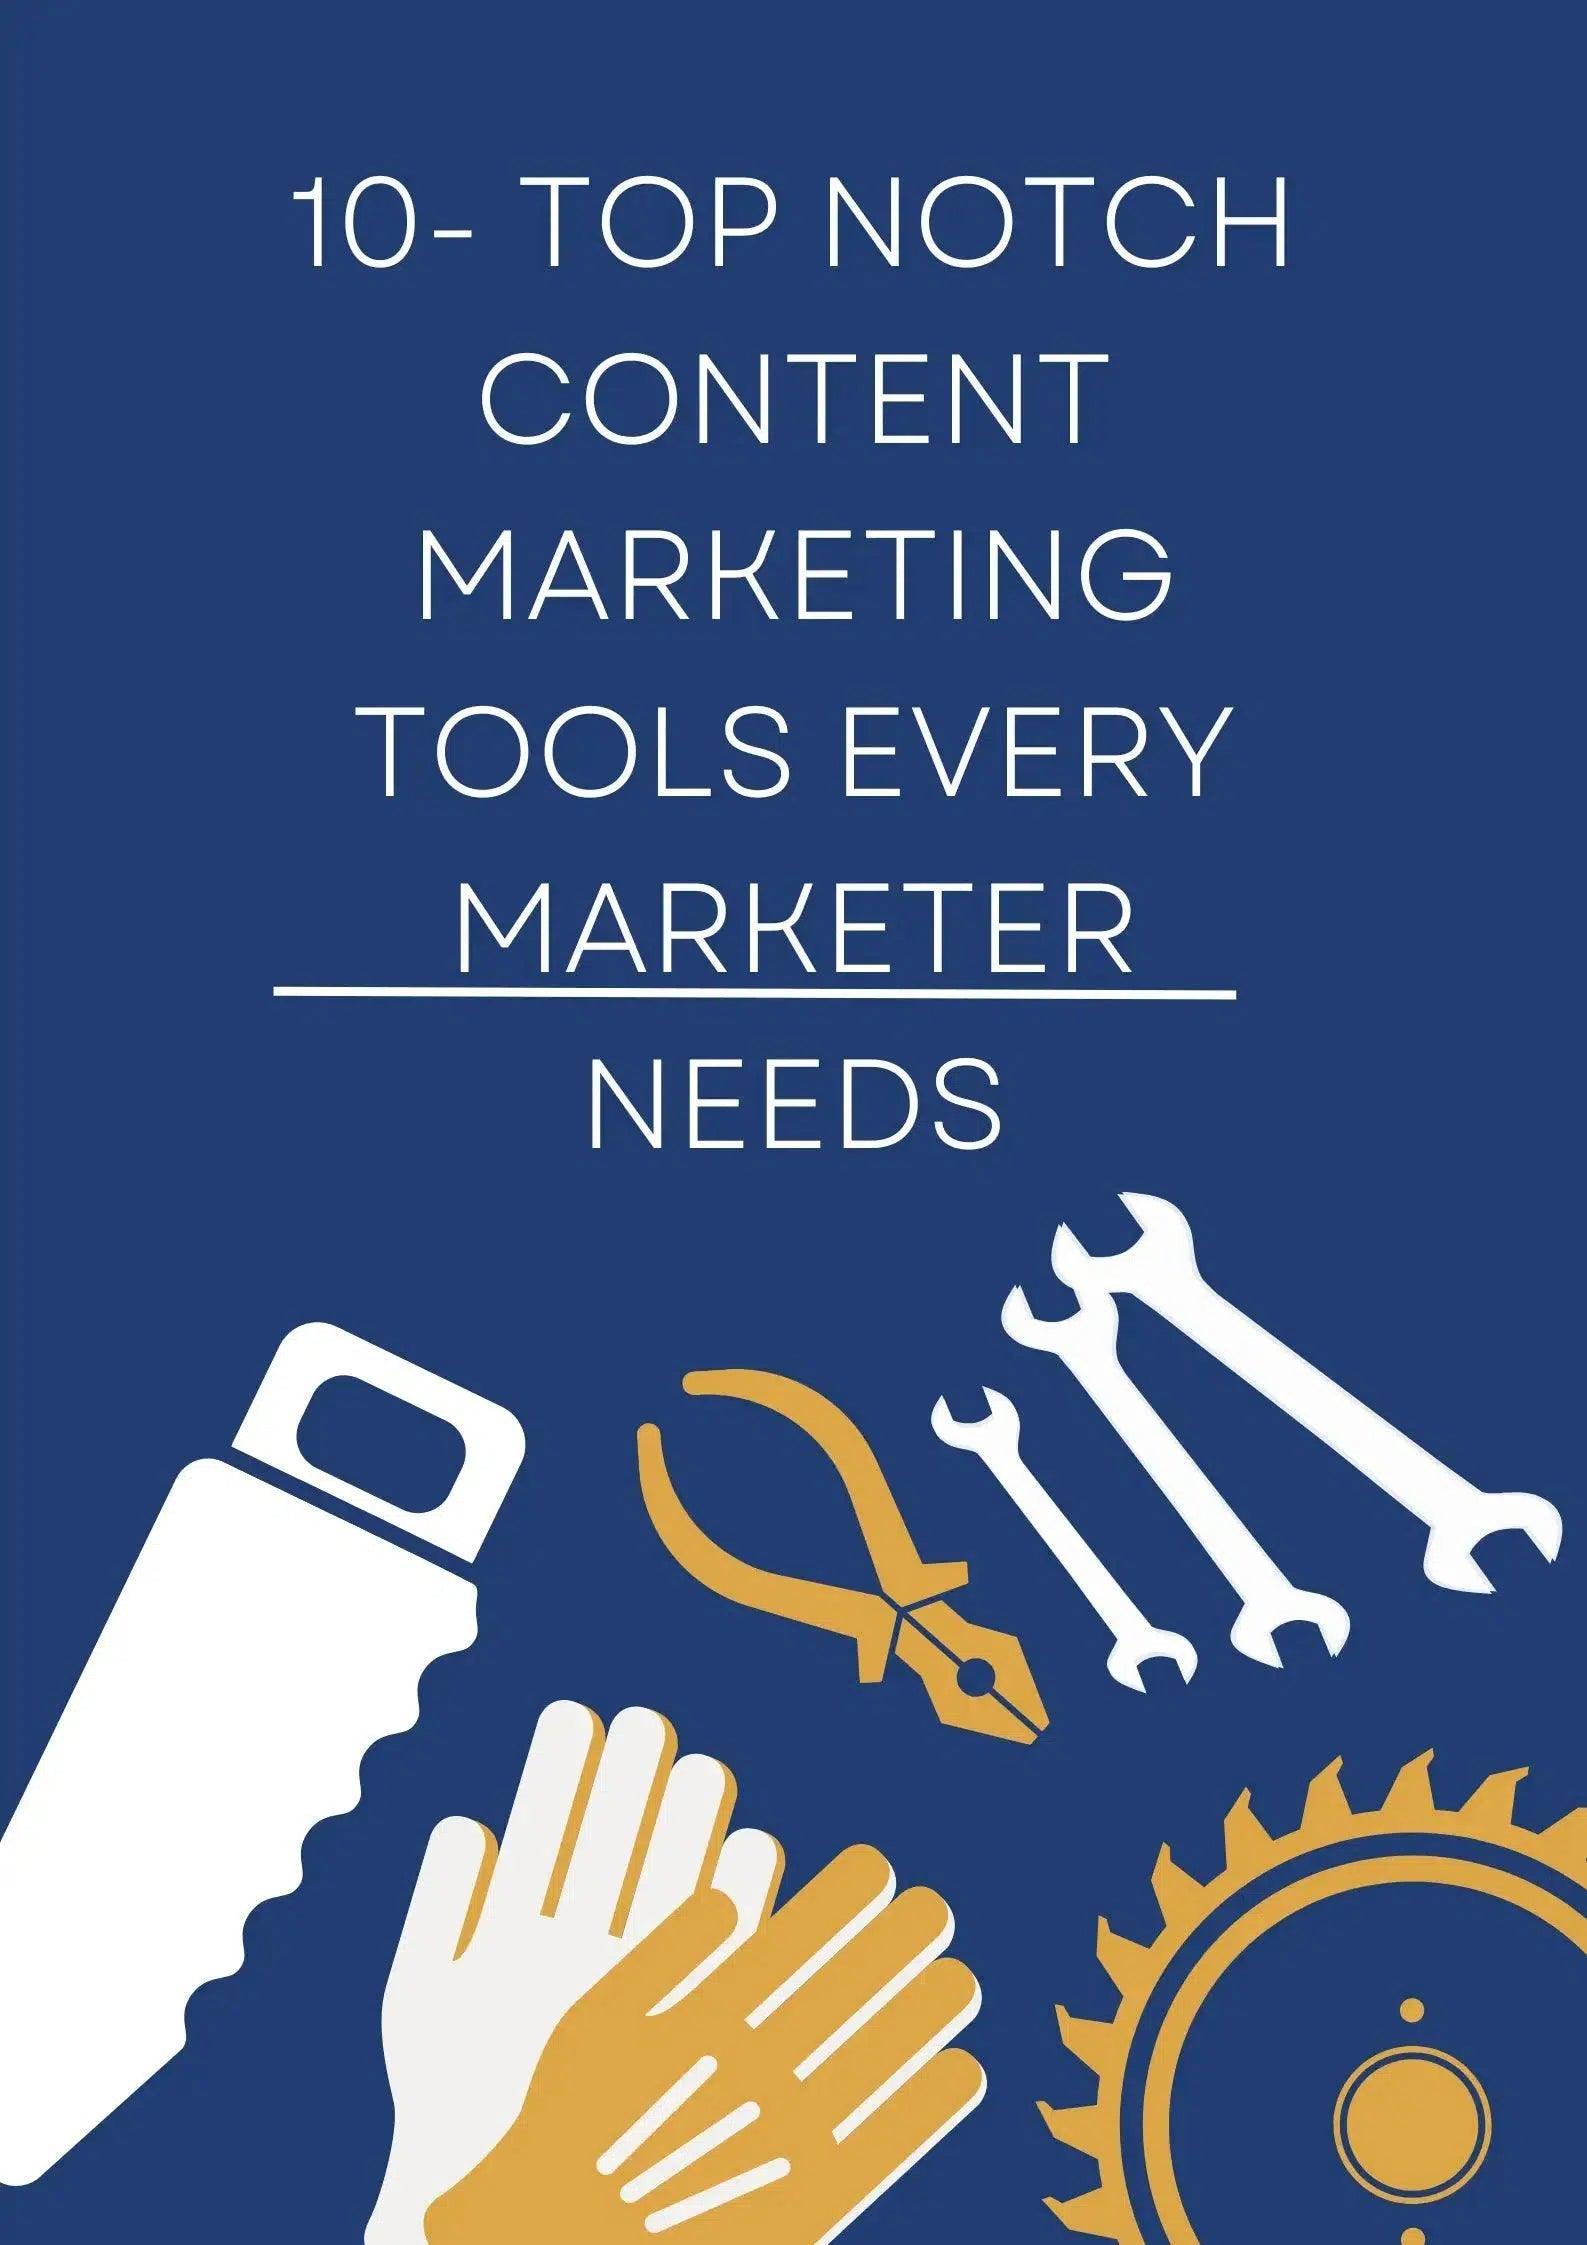 10- Top Notch Content Marketing Tools every Marketer Will Need in 2023